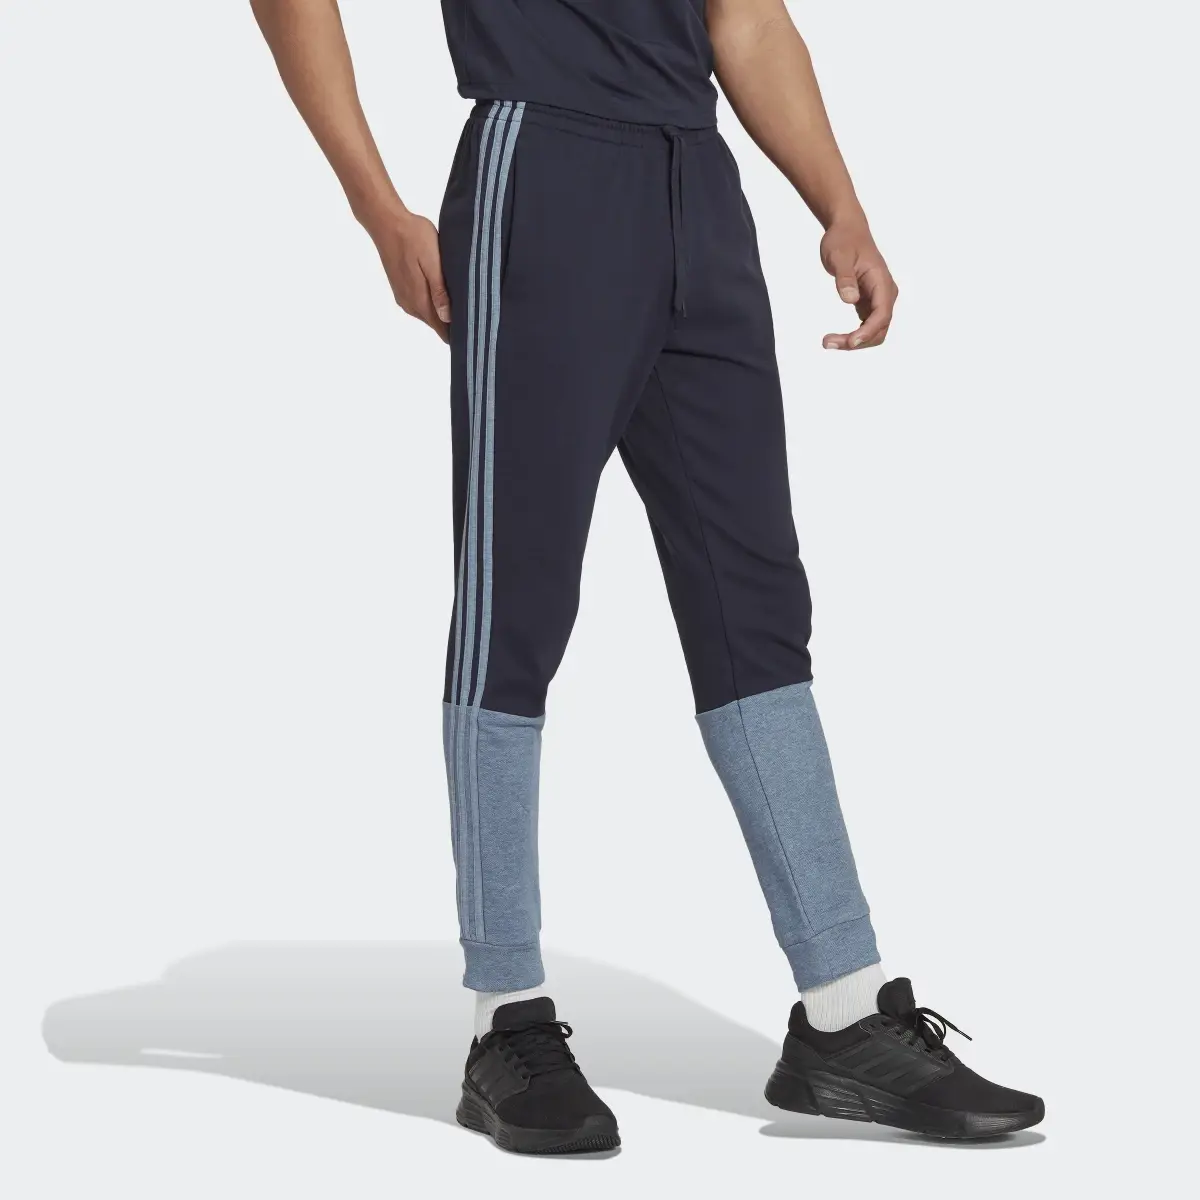 Adidas Essentials Mélange French Terry Pants. 3